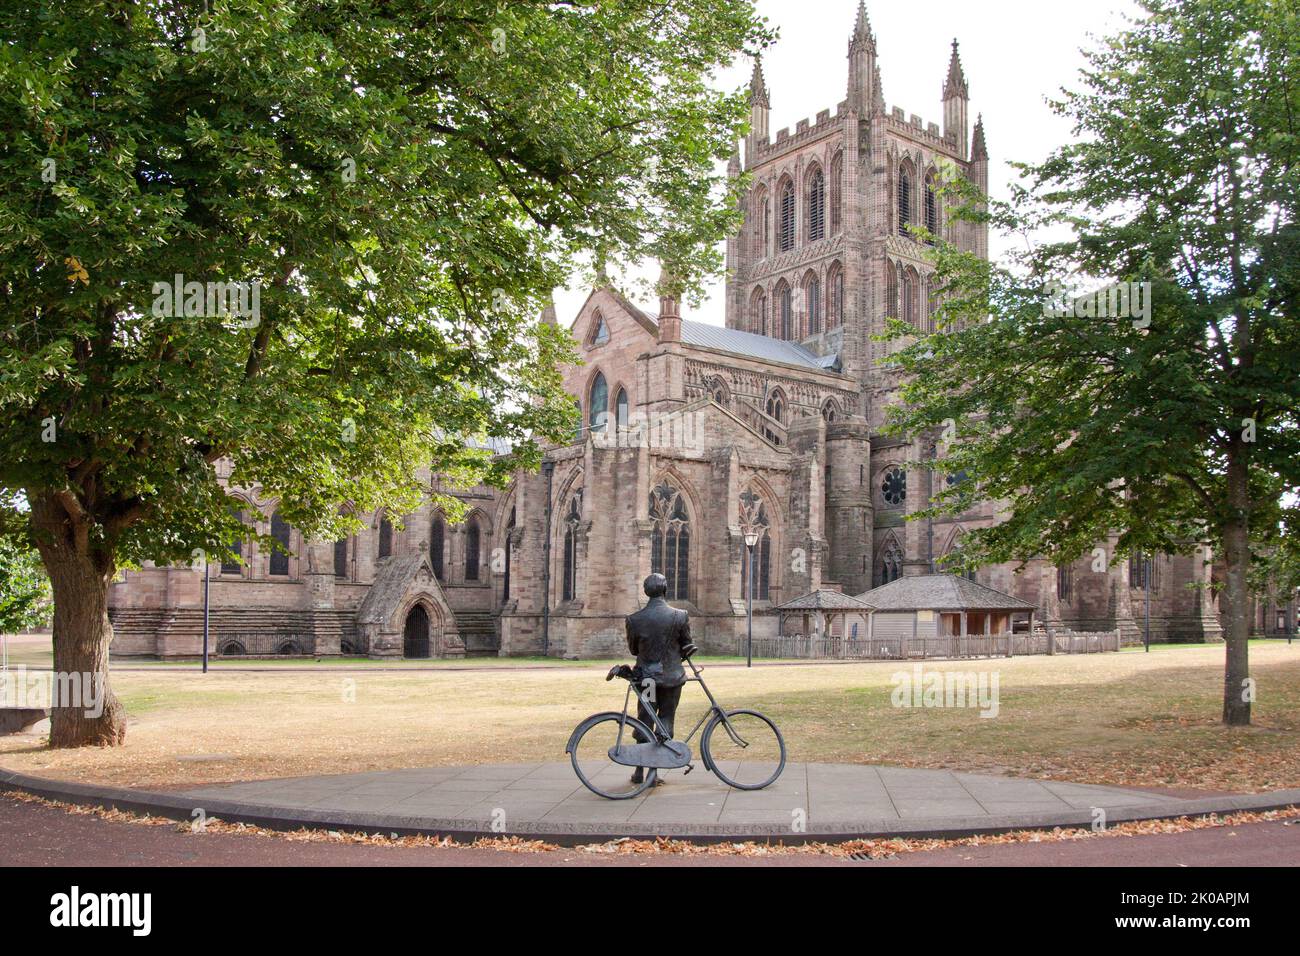 Hereford cathedral & statue of Edward Elgar with his bicycle, St Mary the Virgin & St Ethelbert the King, Herefordshire, England Stock Photo